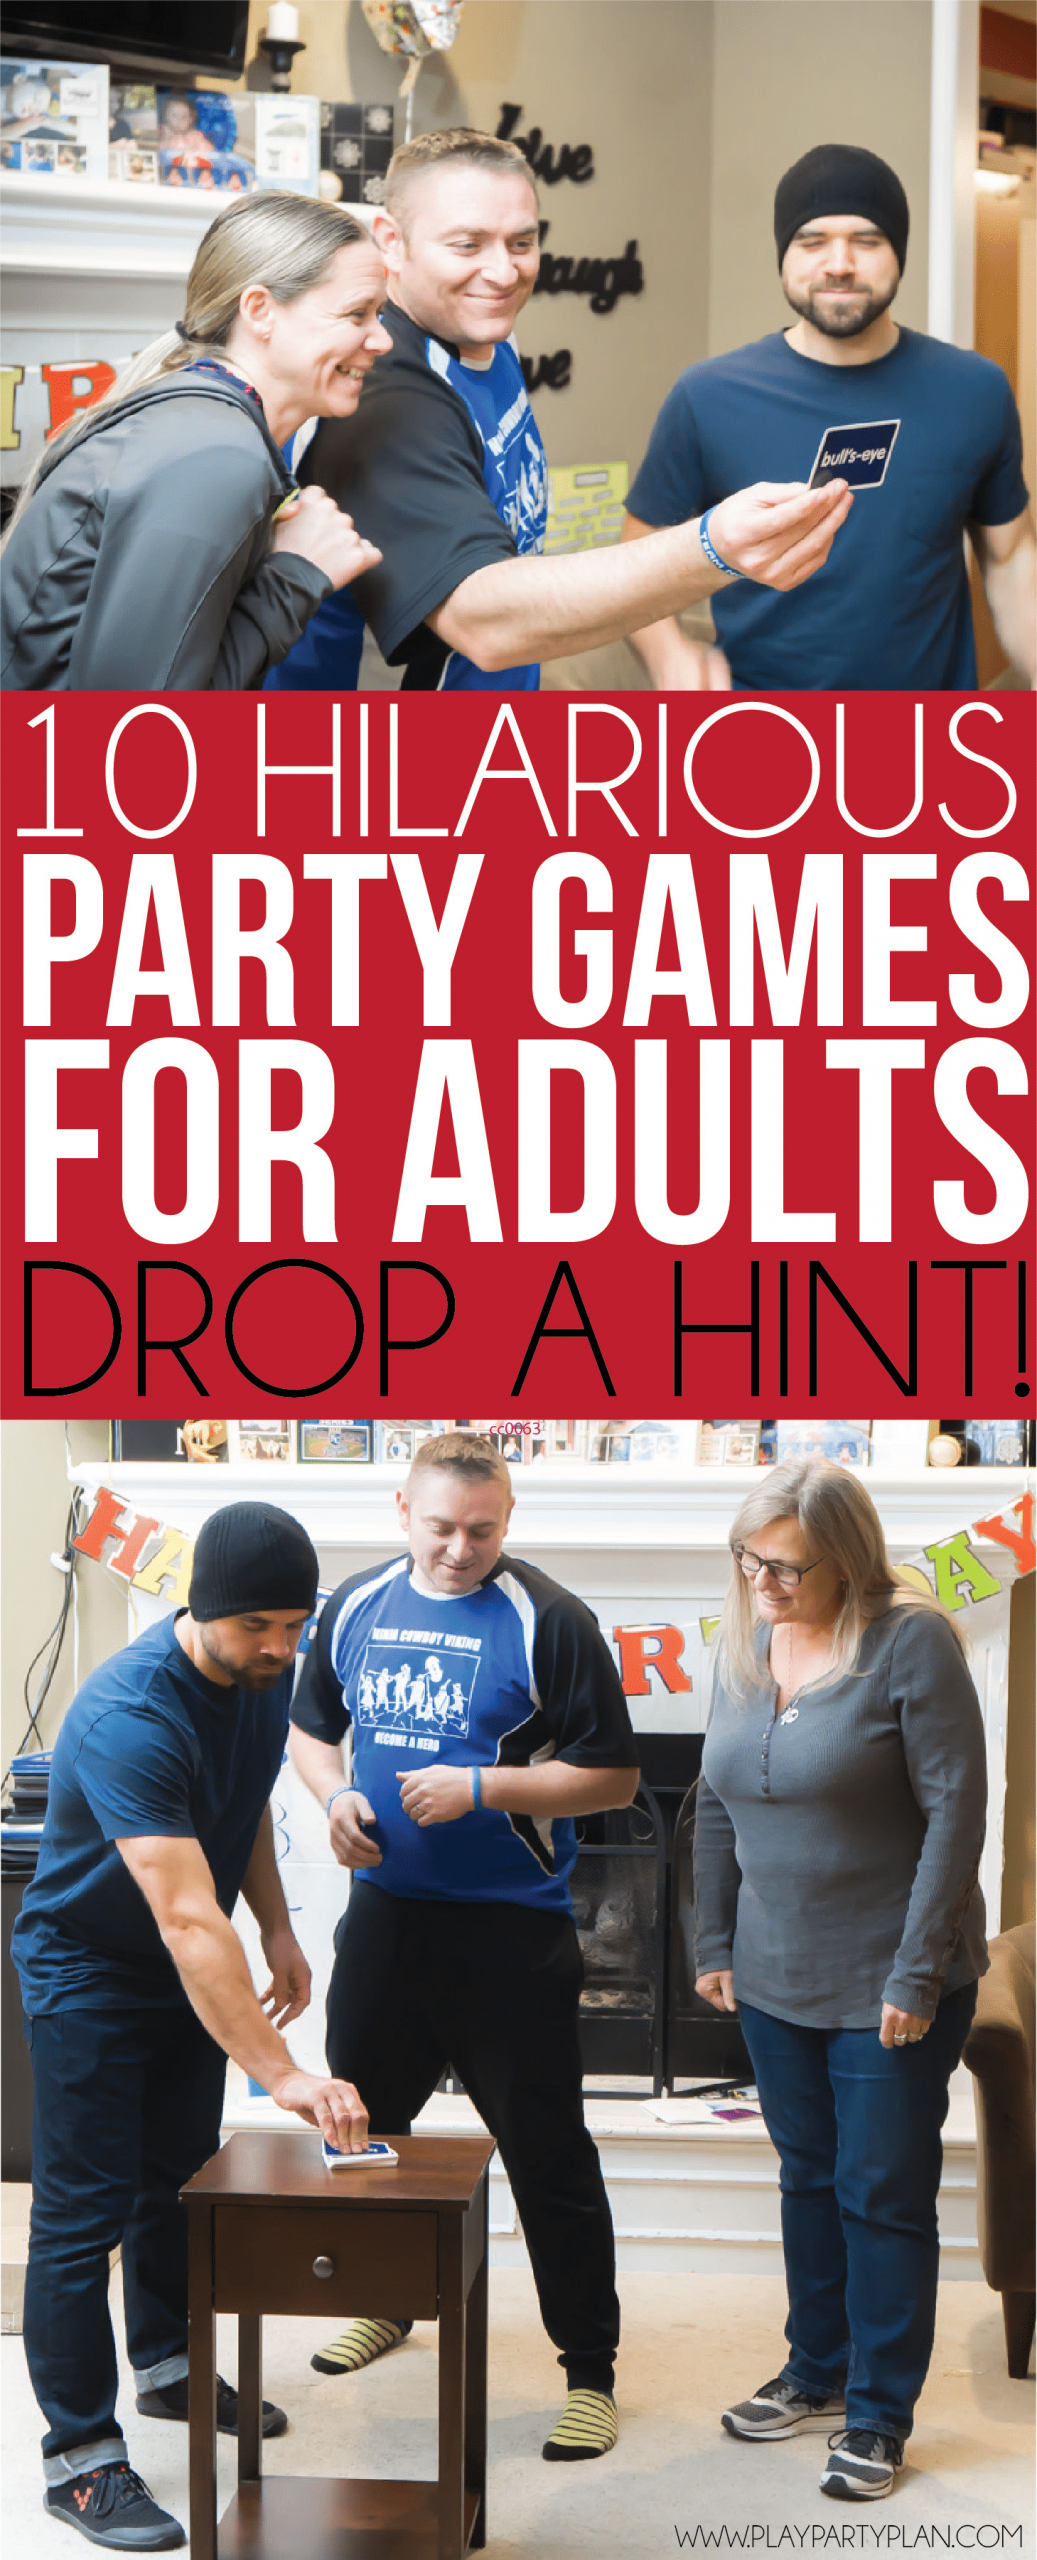 Party Activities For Adults
 19 Hilarious Party Games for Adults Play Party Plan